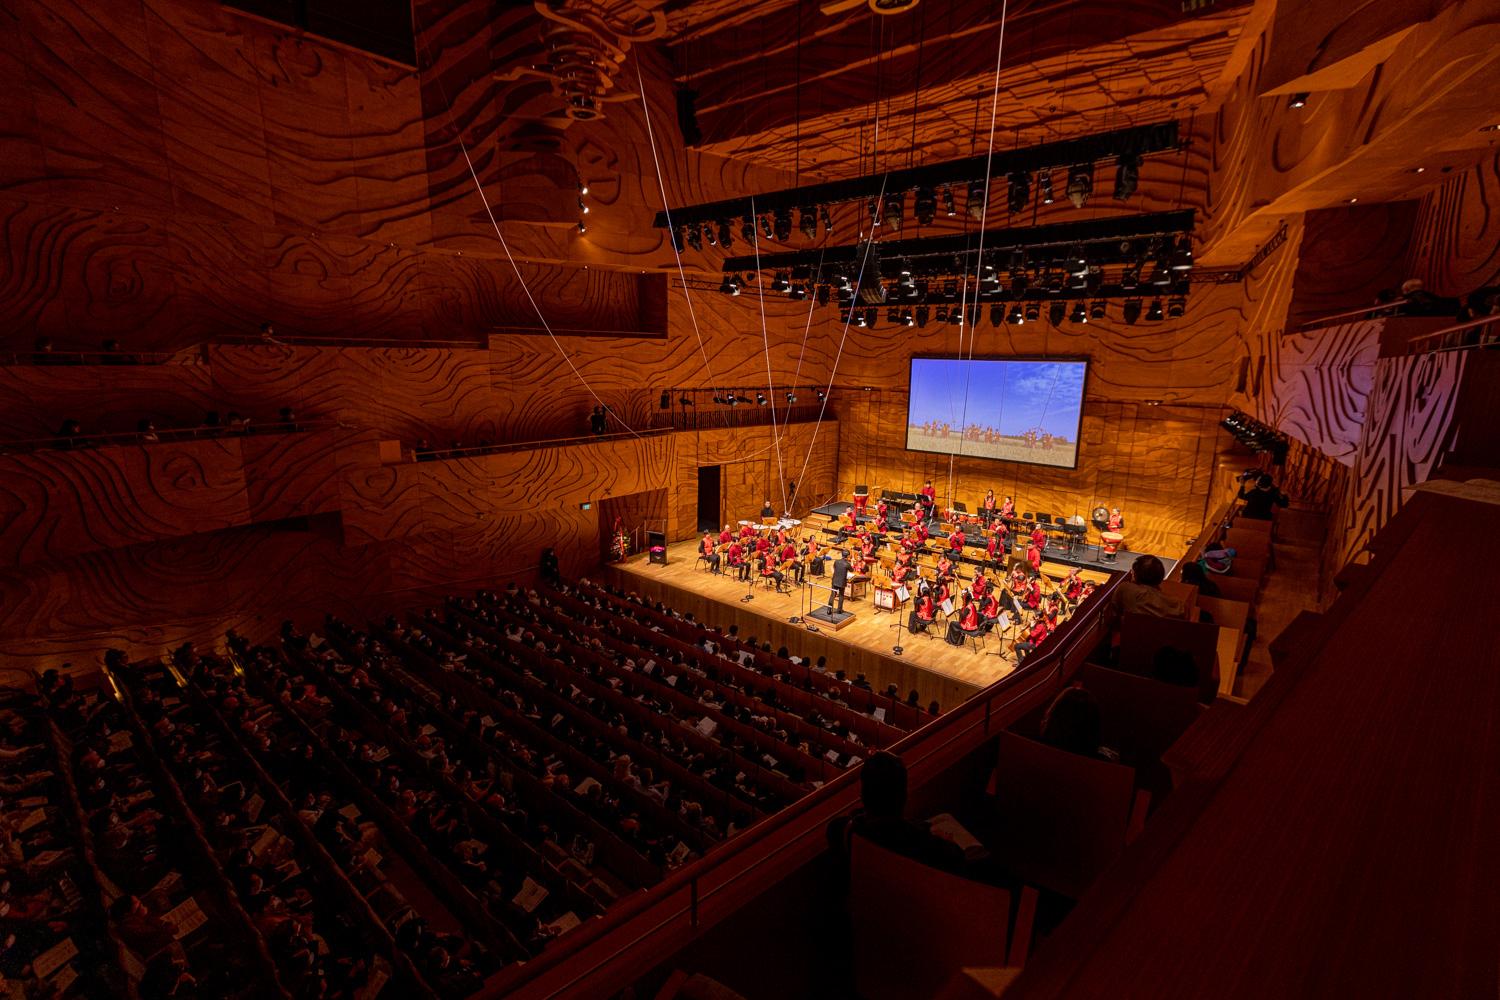 The Hong Kong Economic and Trade Office, Sydney, presented the "HK 25 & Chao Feng 40" Chinese music concert in Melbourne, Australia, yesterday (September 4) to celebrate the 25th anniversary of the establishment of the Hong Kong Special Administrative Region and promote traditional Chinese music. The concert was well-received by over 900 guests.